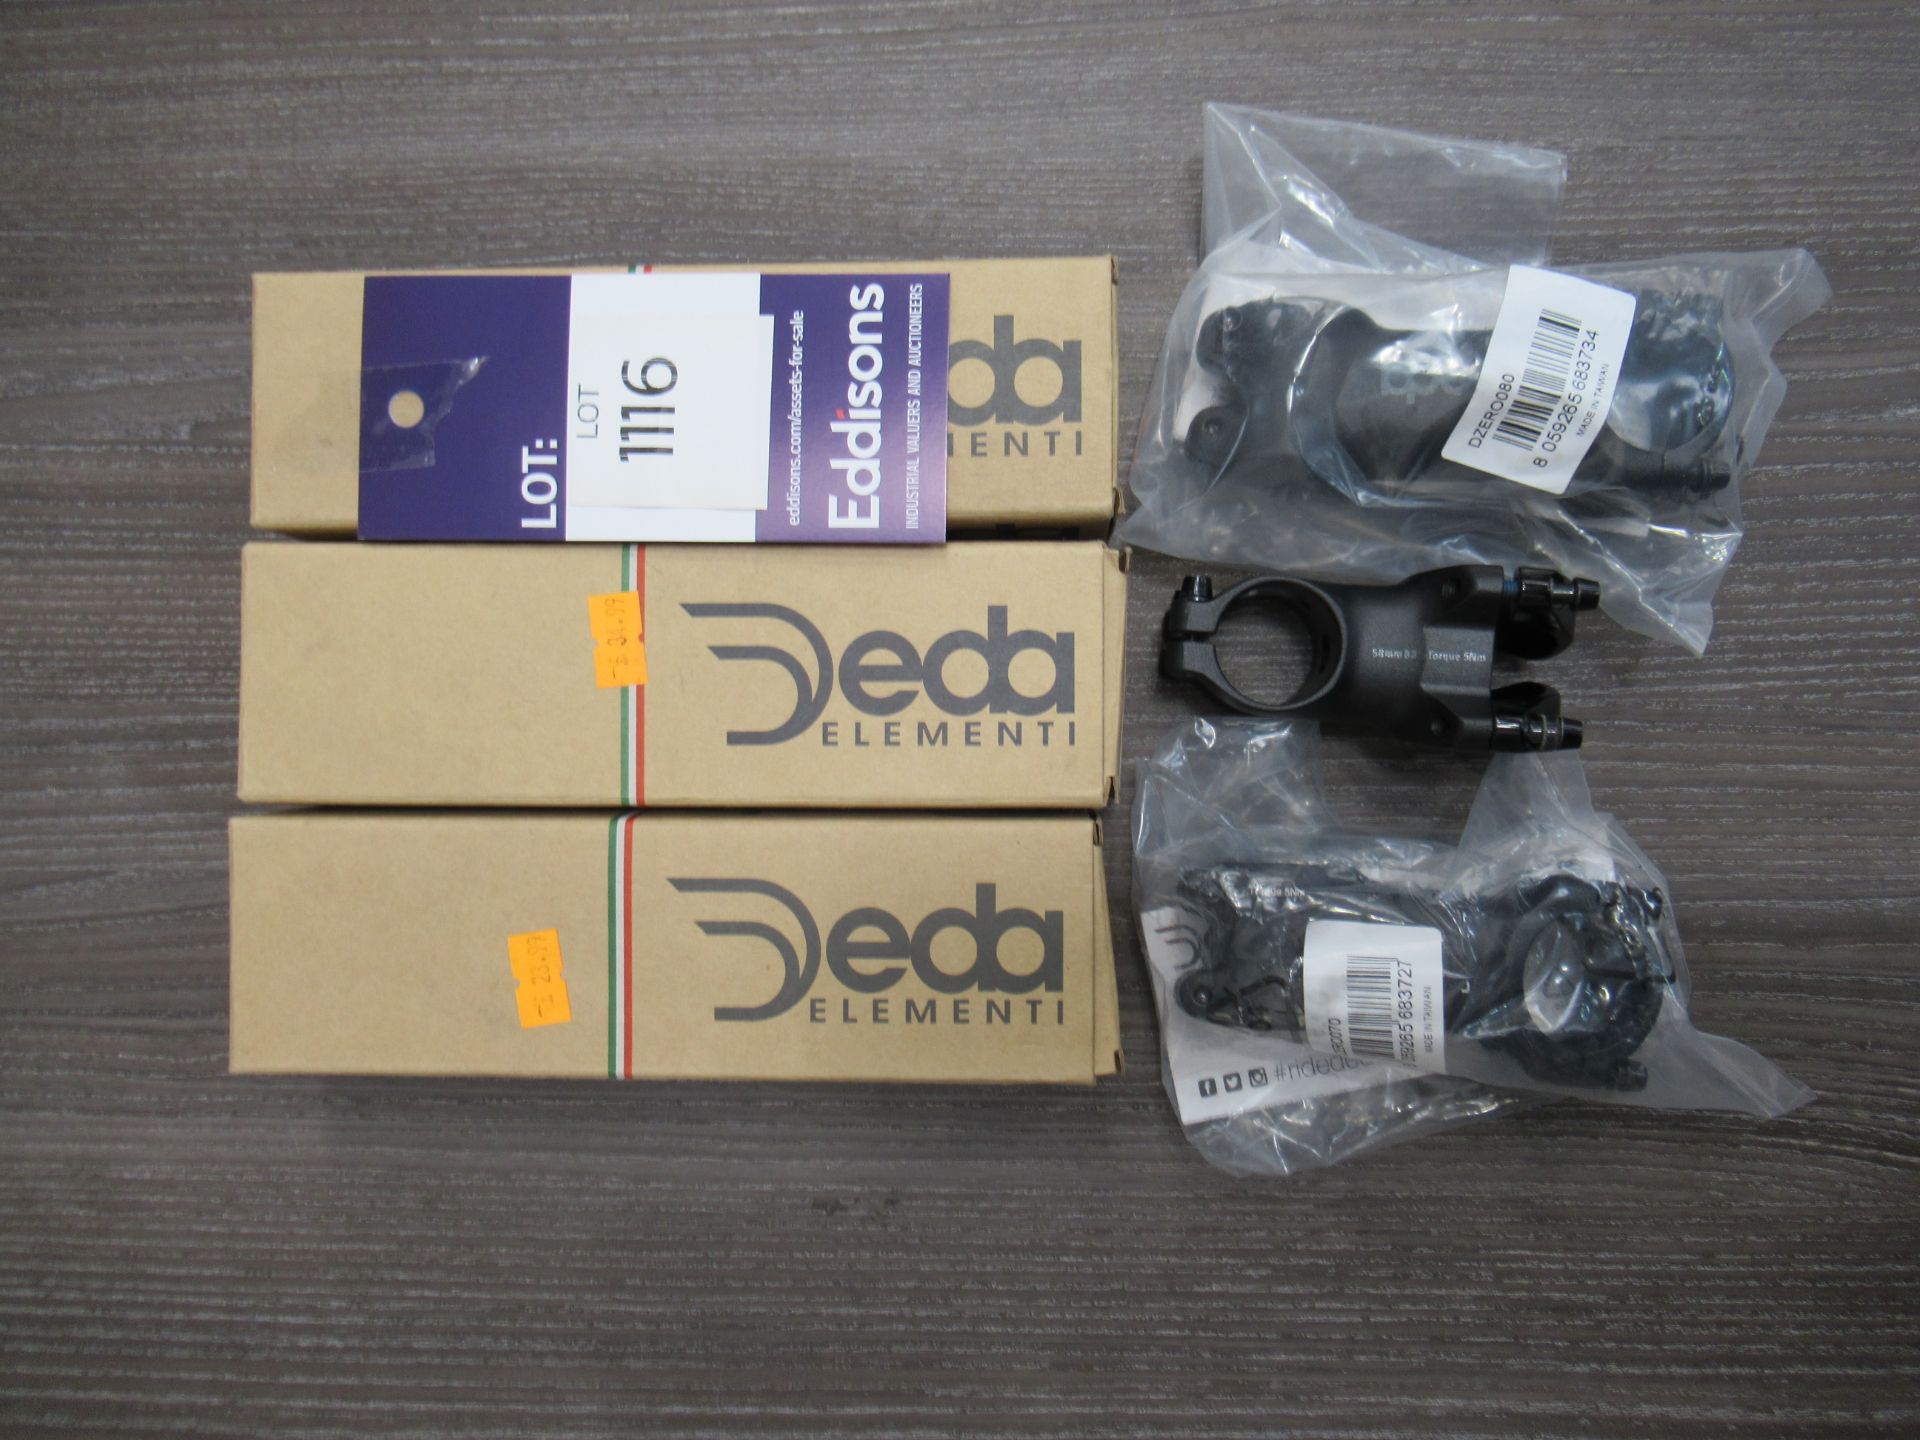 6 x DEBA bicycle stems - 50, 70, 80 (2) and 90mm (2) including 3 x ELEMENTI and 3 x ZERO (total RRP£